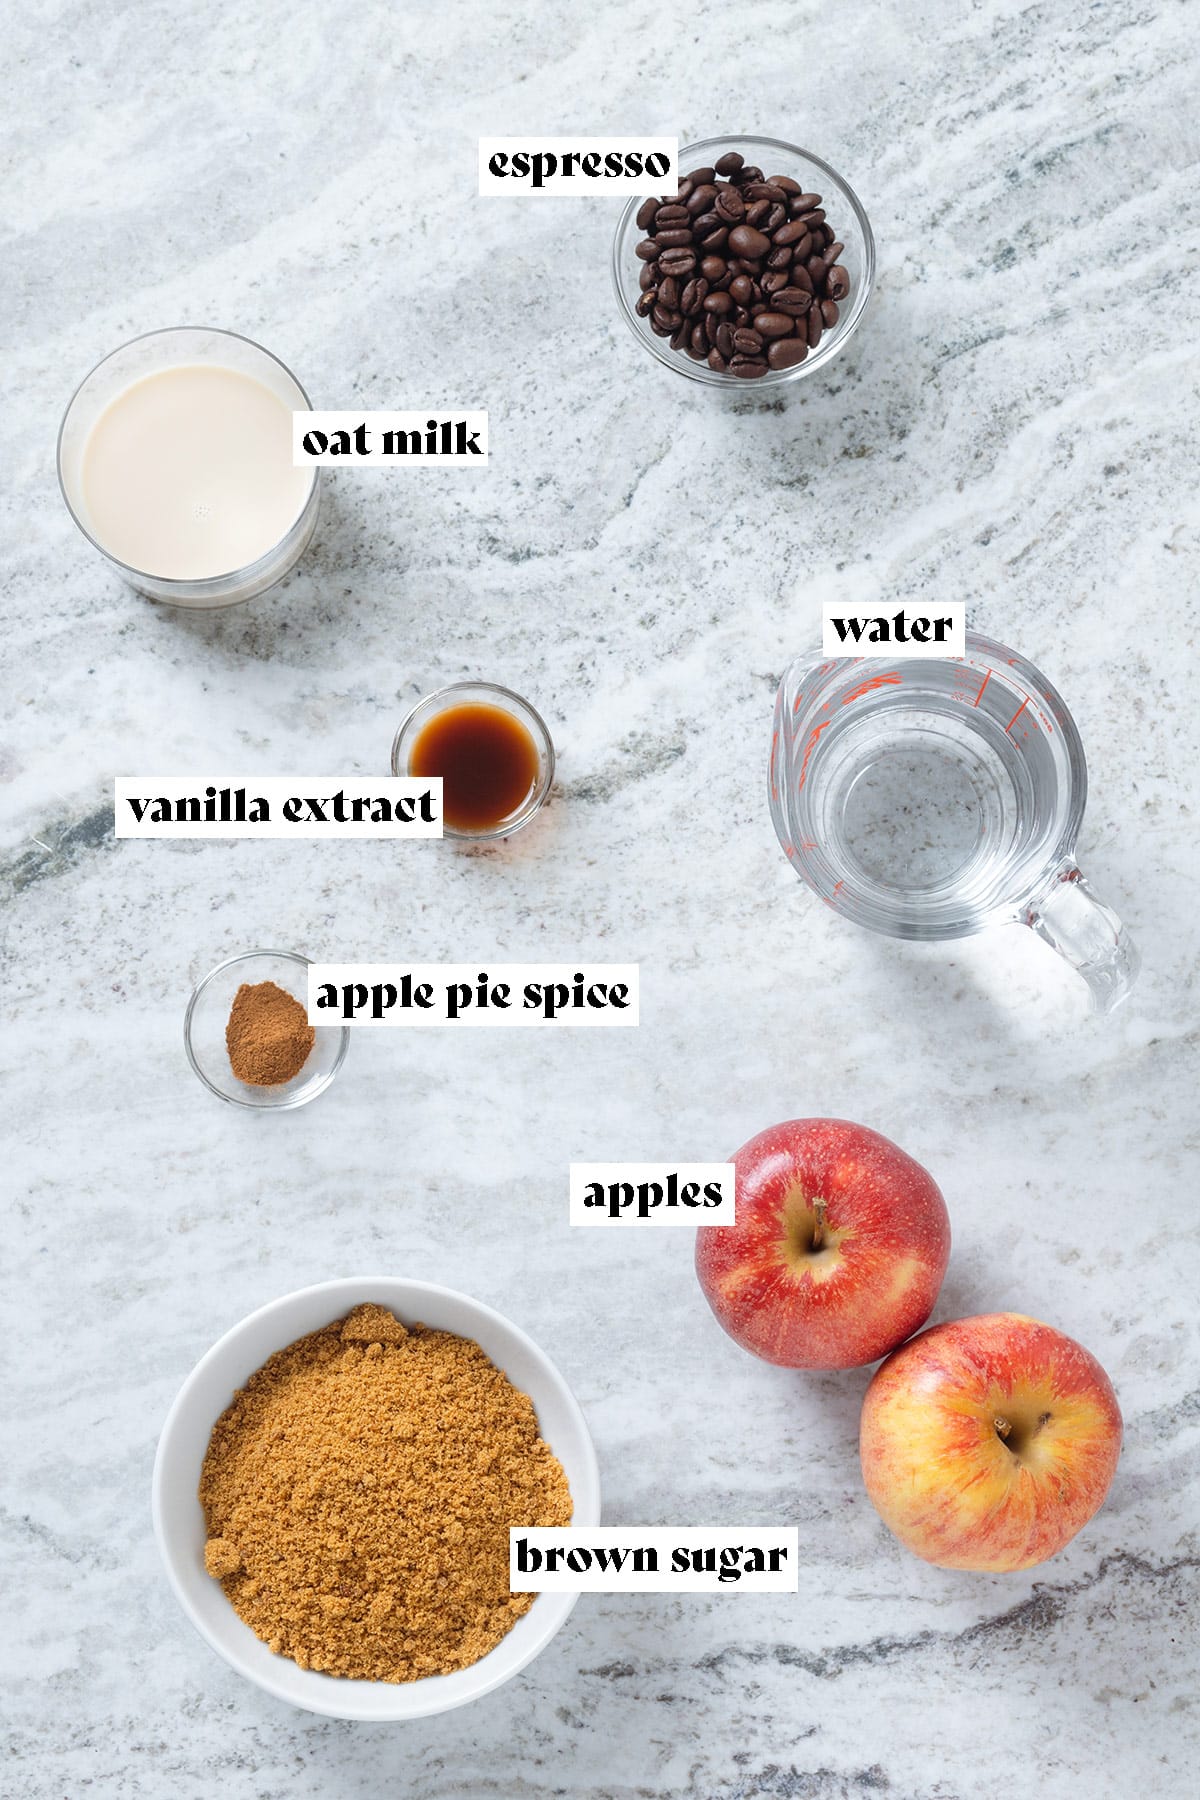 Apples, brown sugar, coffee beans, spices, and other ingredients laid out on a grey stone background with text overlay.